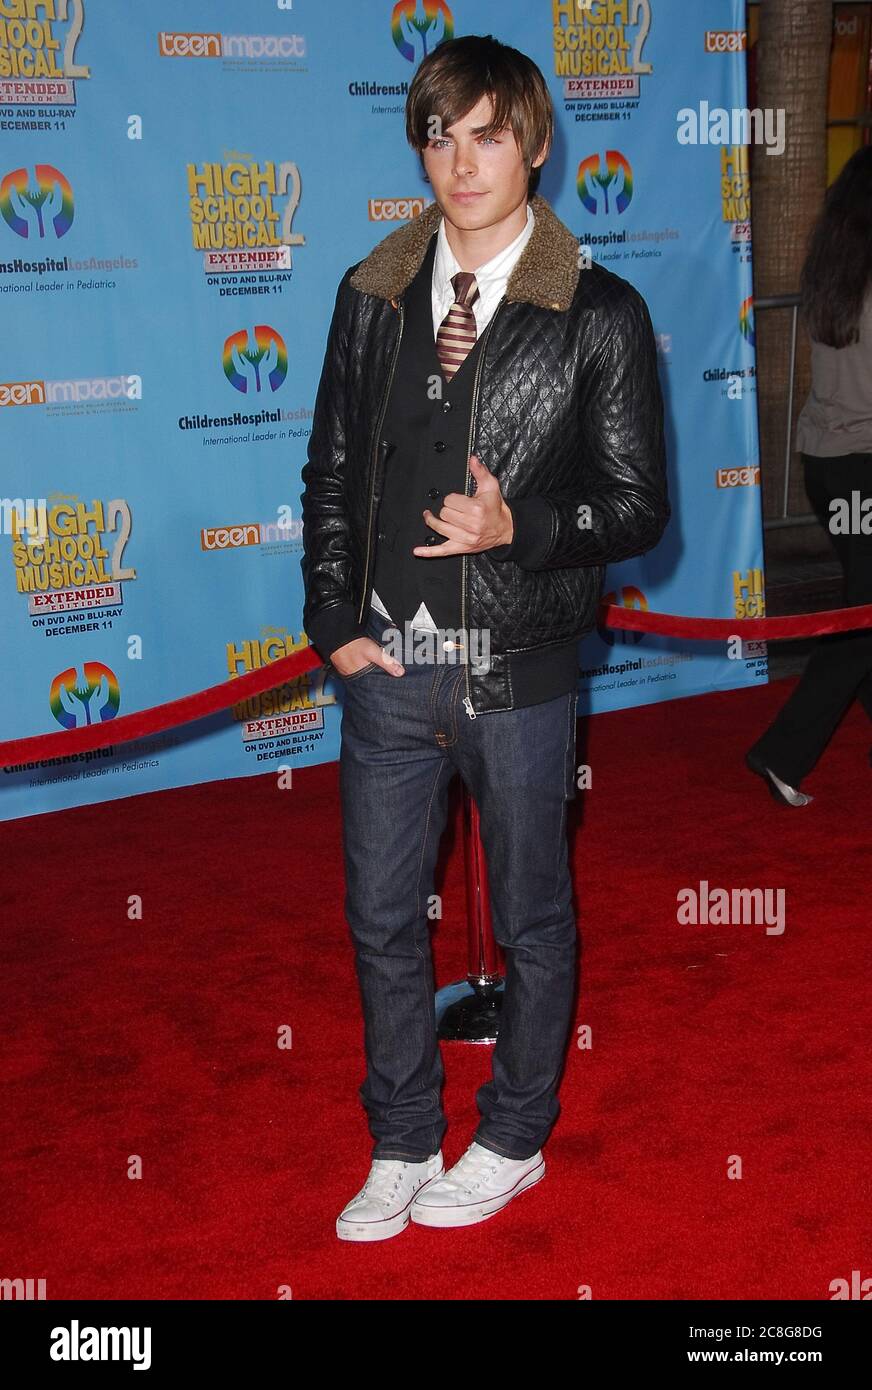 Zac Efron at the High School Musical 2: Extended Edition DVD Release Premiere held at the El Capitan Theatre in Hollywood, CA. The event took place on Monday, November 19, 2007. Photo by: SBM / PictureLux - File Reference # 34006-11932SBMPLX Stock Photo